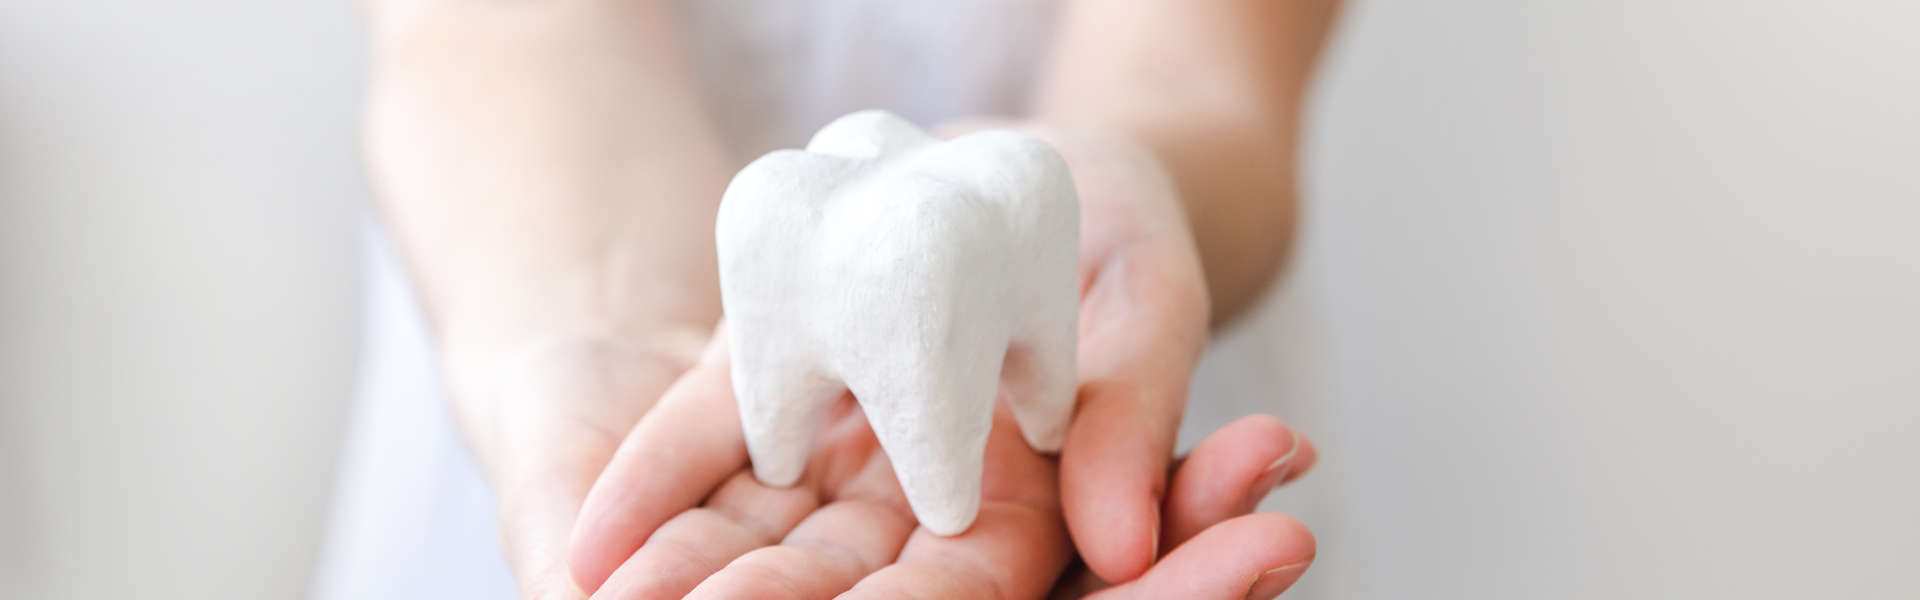 Woman hand holding white healthy tooth model.